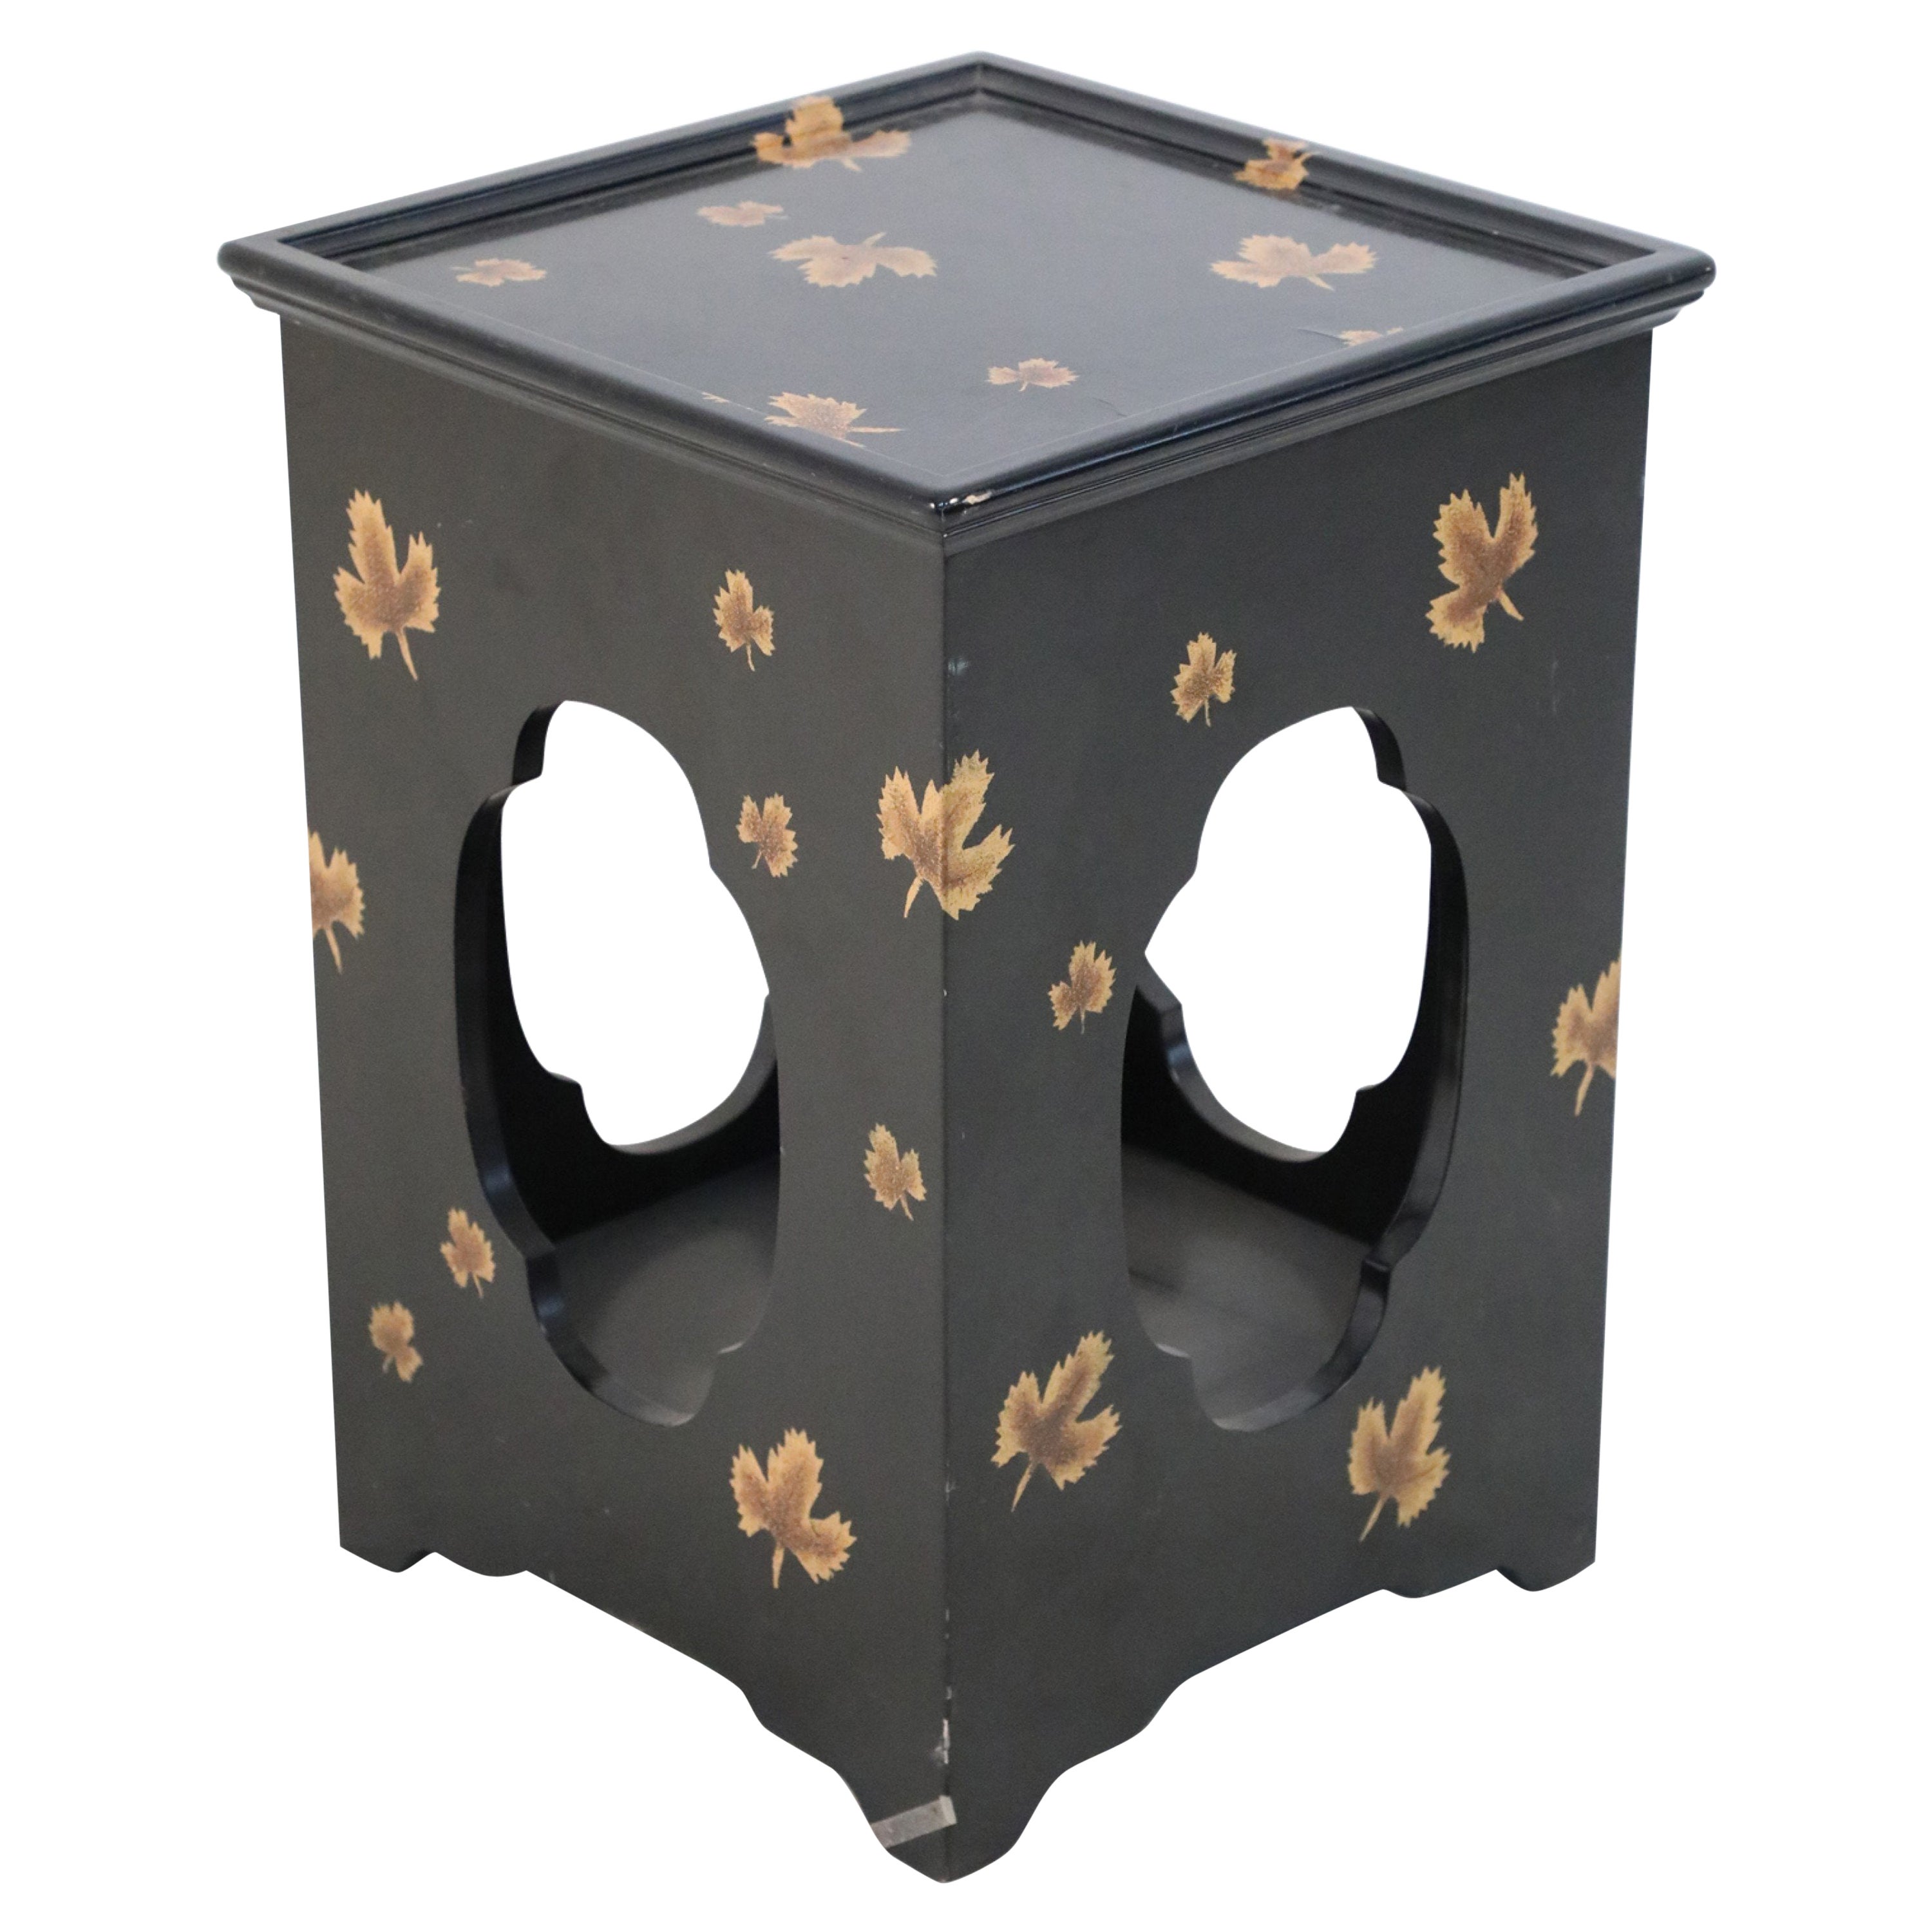 Contemporary Chinese Black and Leaf Motif Square Side Tables For Sale